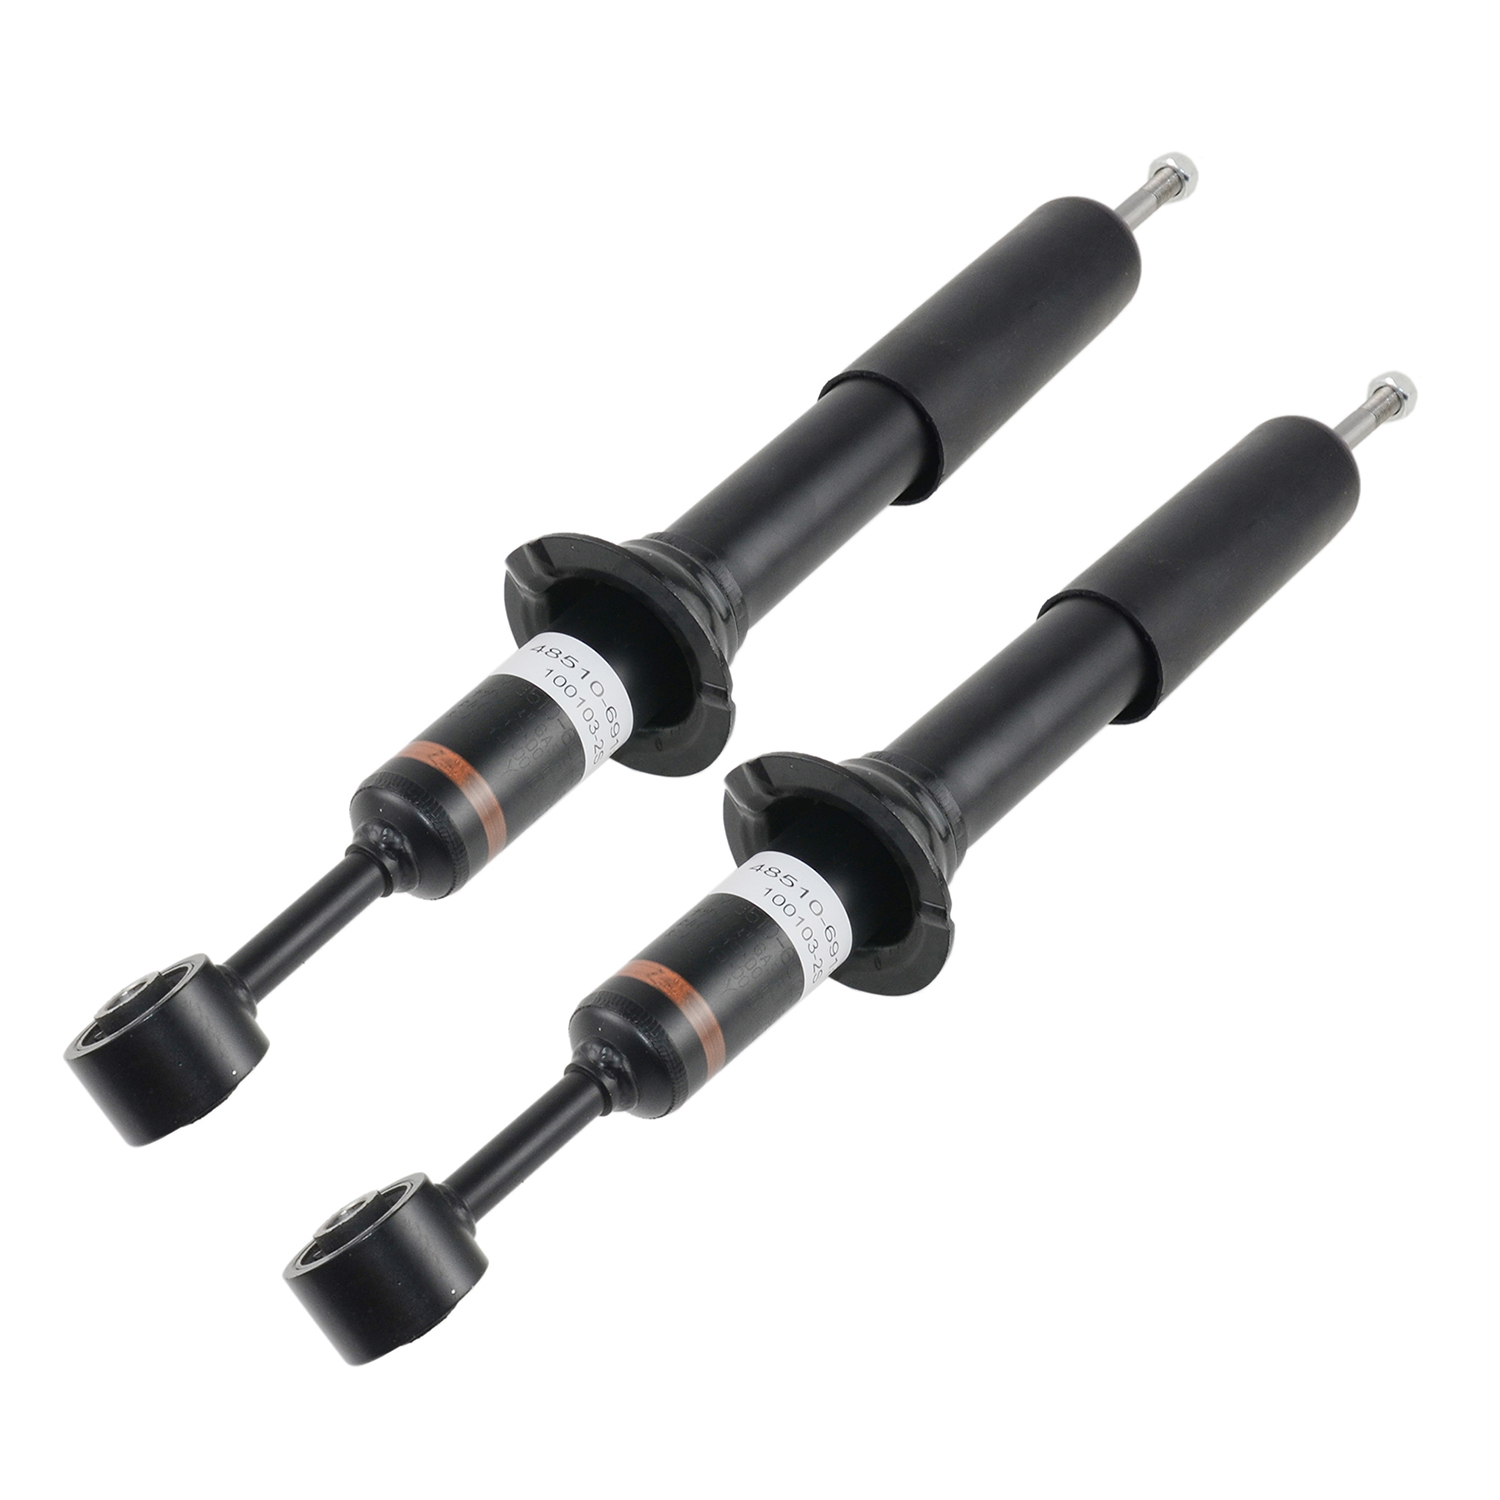 2x Front Air Shock Strut Absorbers For Toyota Land Cruiser